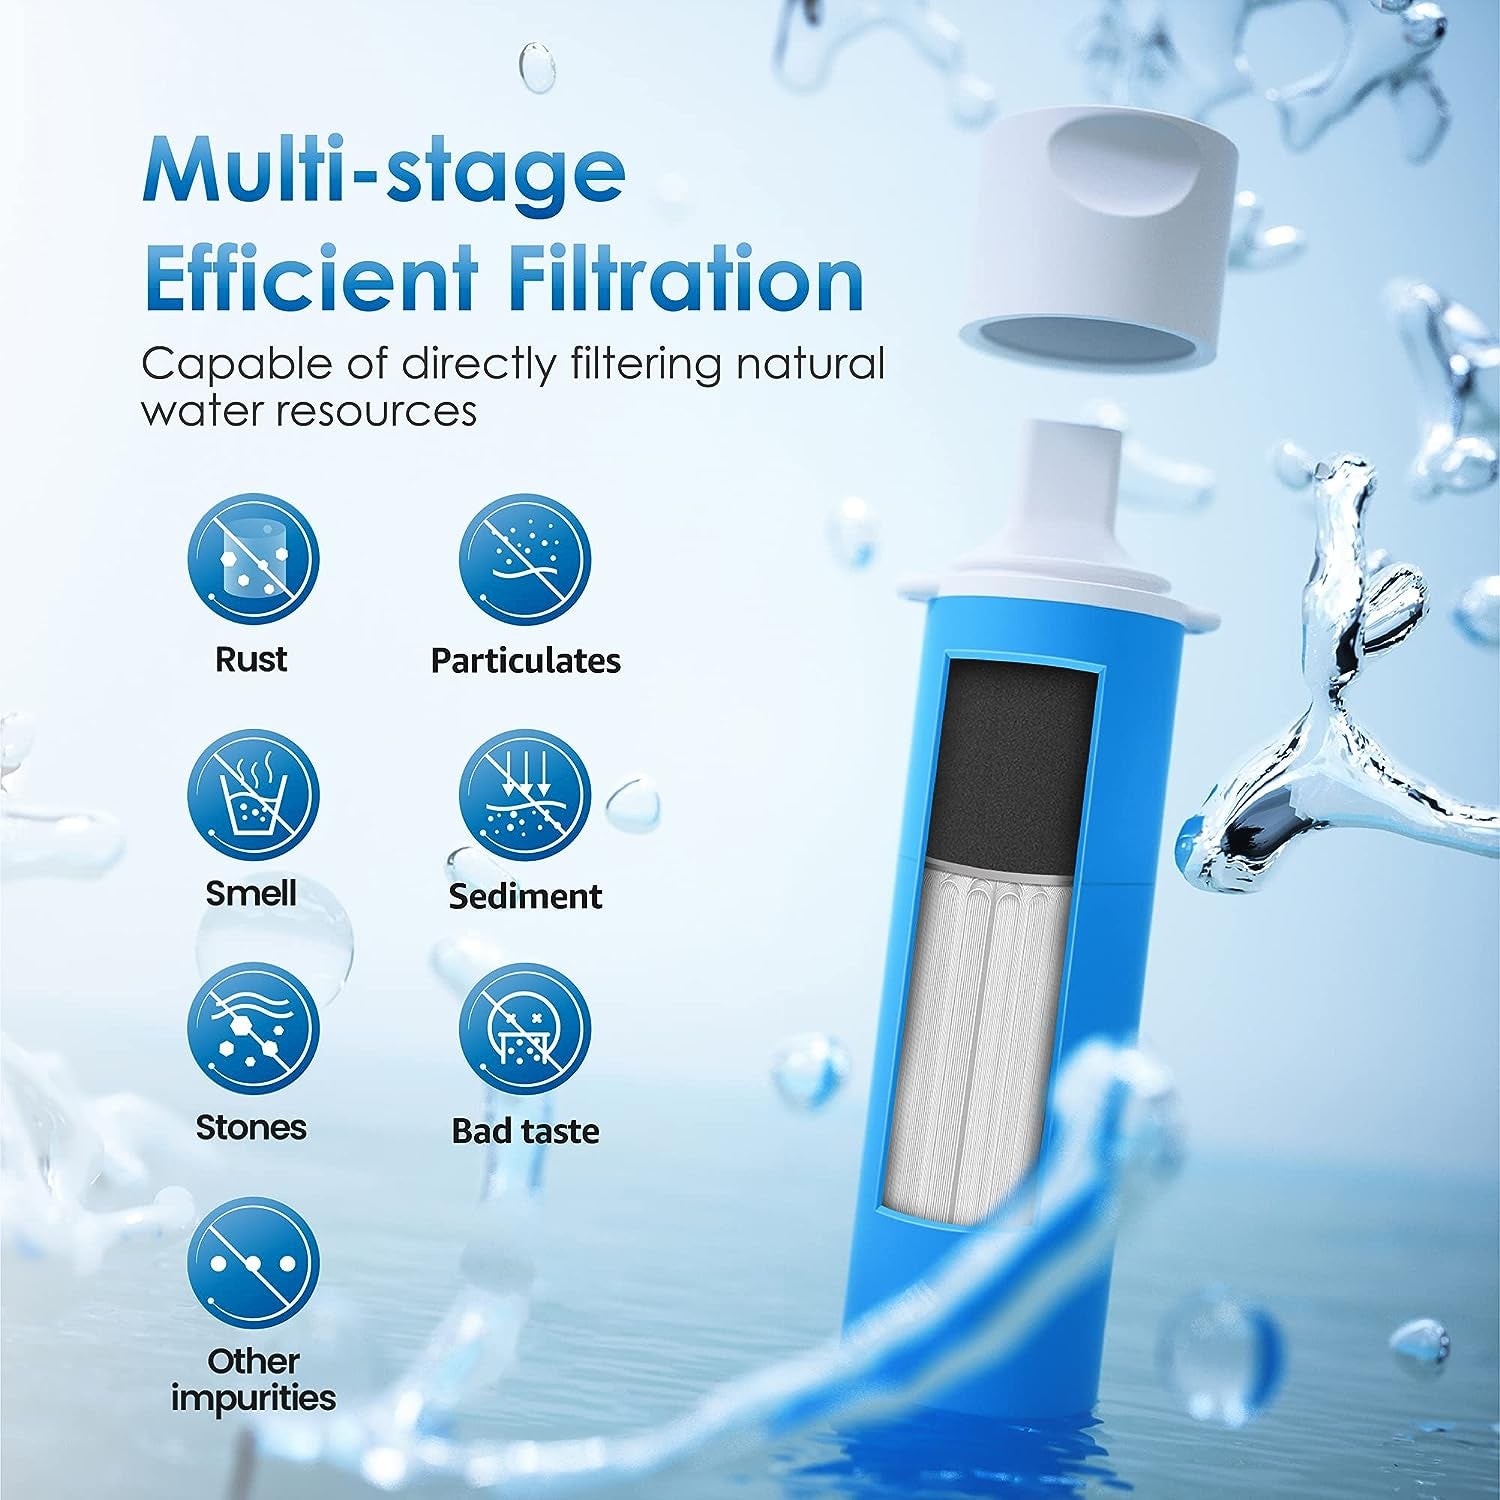 Gravity Water Filter Straw, Camping Water Filtration System, Water Purifier Survival for Travel, Backpacking and Emergency Preparedness, 1.5 Gal Bag, 0.1 Micron, 5 Stage Filtration, Blue